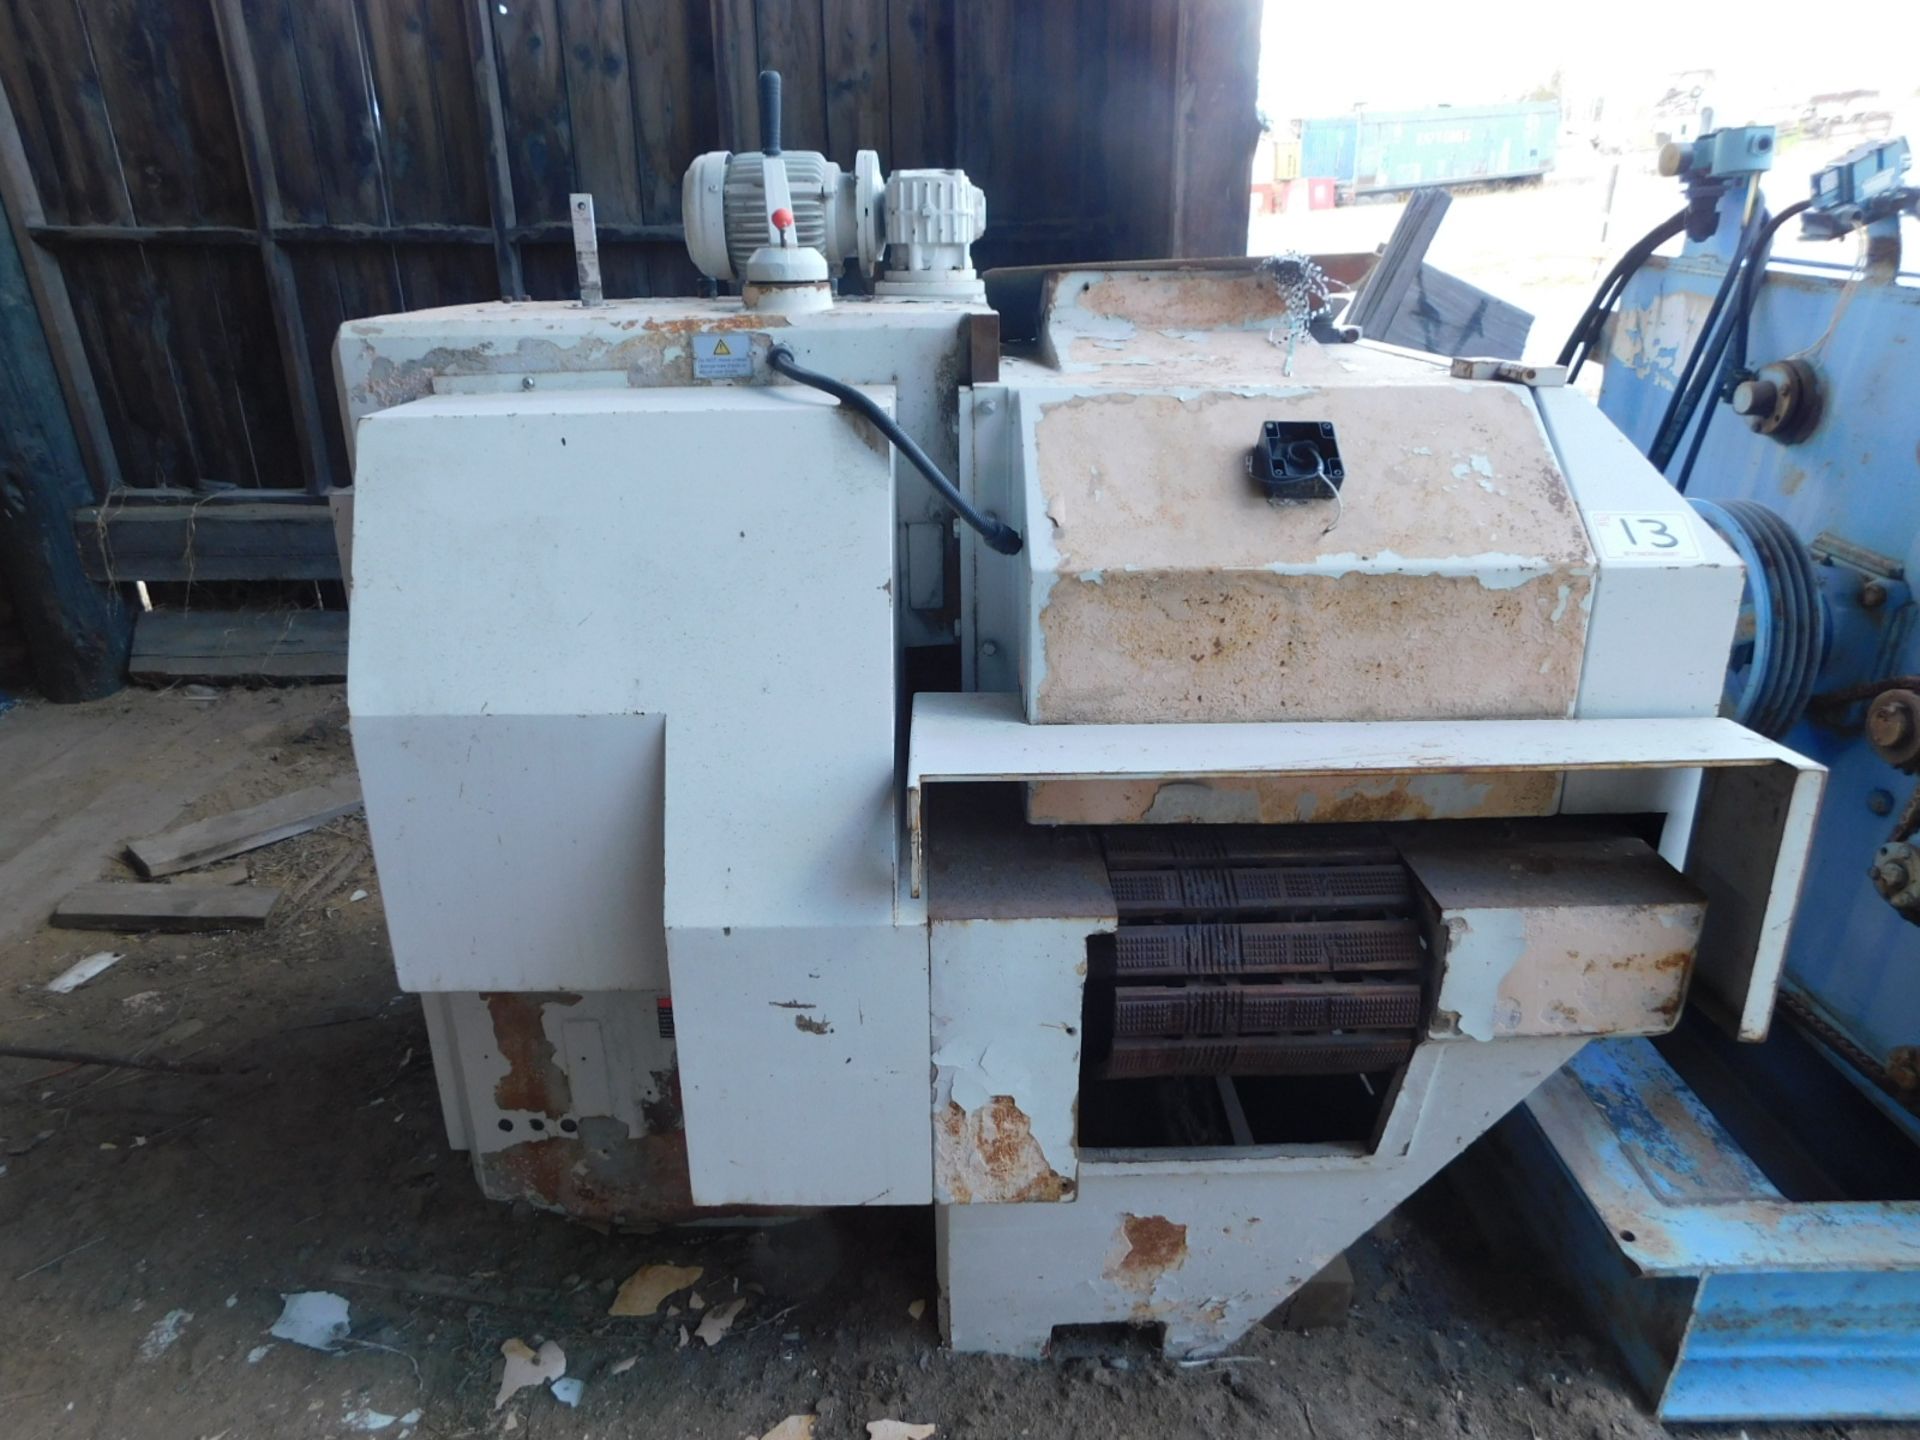 CANTEK MRS - 300A MULTIRIP SAW, 50HP, 575V, S/N 070554034, (CONDITION UNKNOWN) - Image 3 of 5